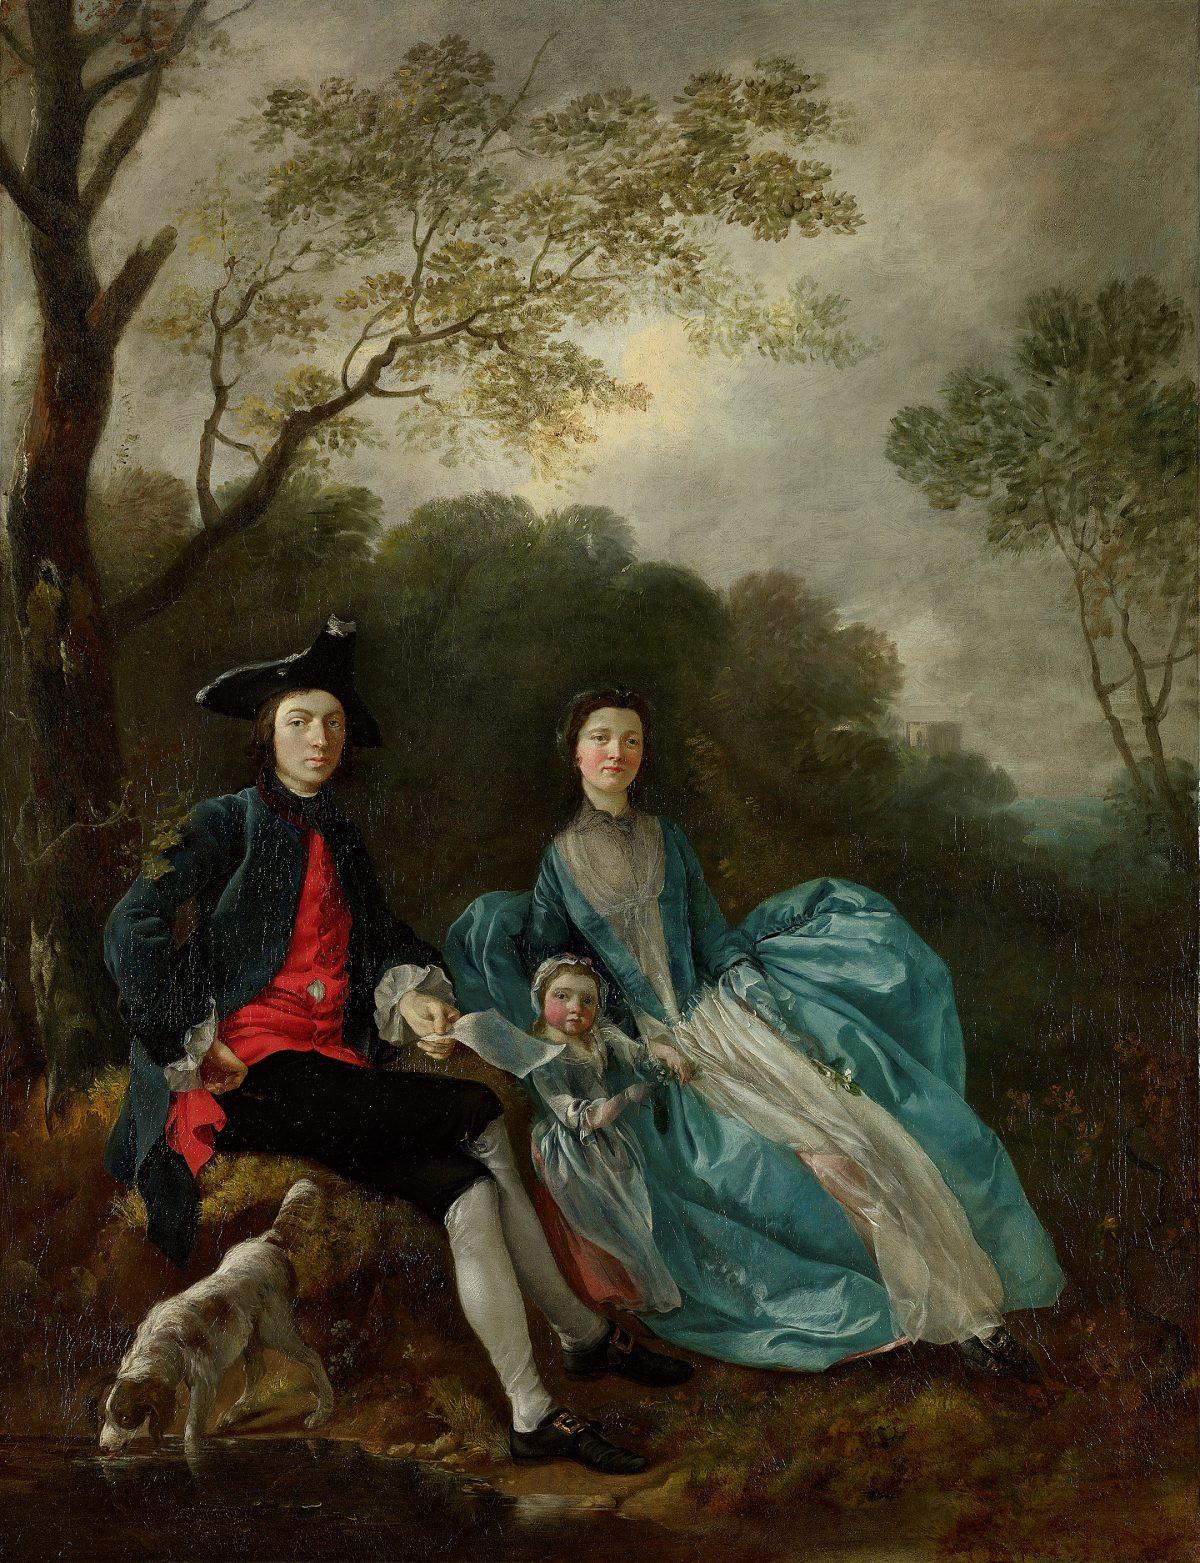 “The Artist with His Wife Margaret and Eldest Daughter Mary,” circa 1748, by Thomas Gainsborough. Oil on canvas. Acquired under the acceptance-in-lieu scheme at the wish of Sybil, Marchioness of Cholmondeley, in memory of her brother, Sir Philip Sassoon, 1994, The National Gallery, London. (The National Gallery, London)